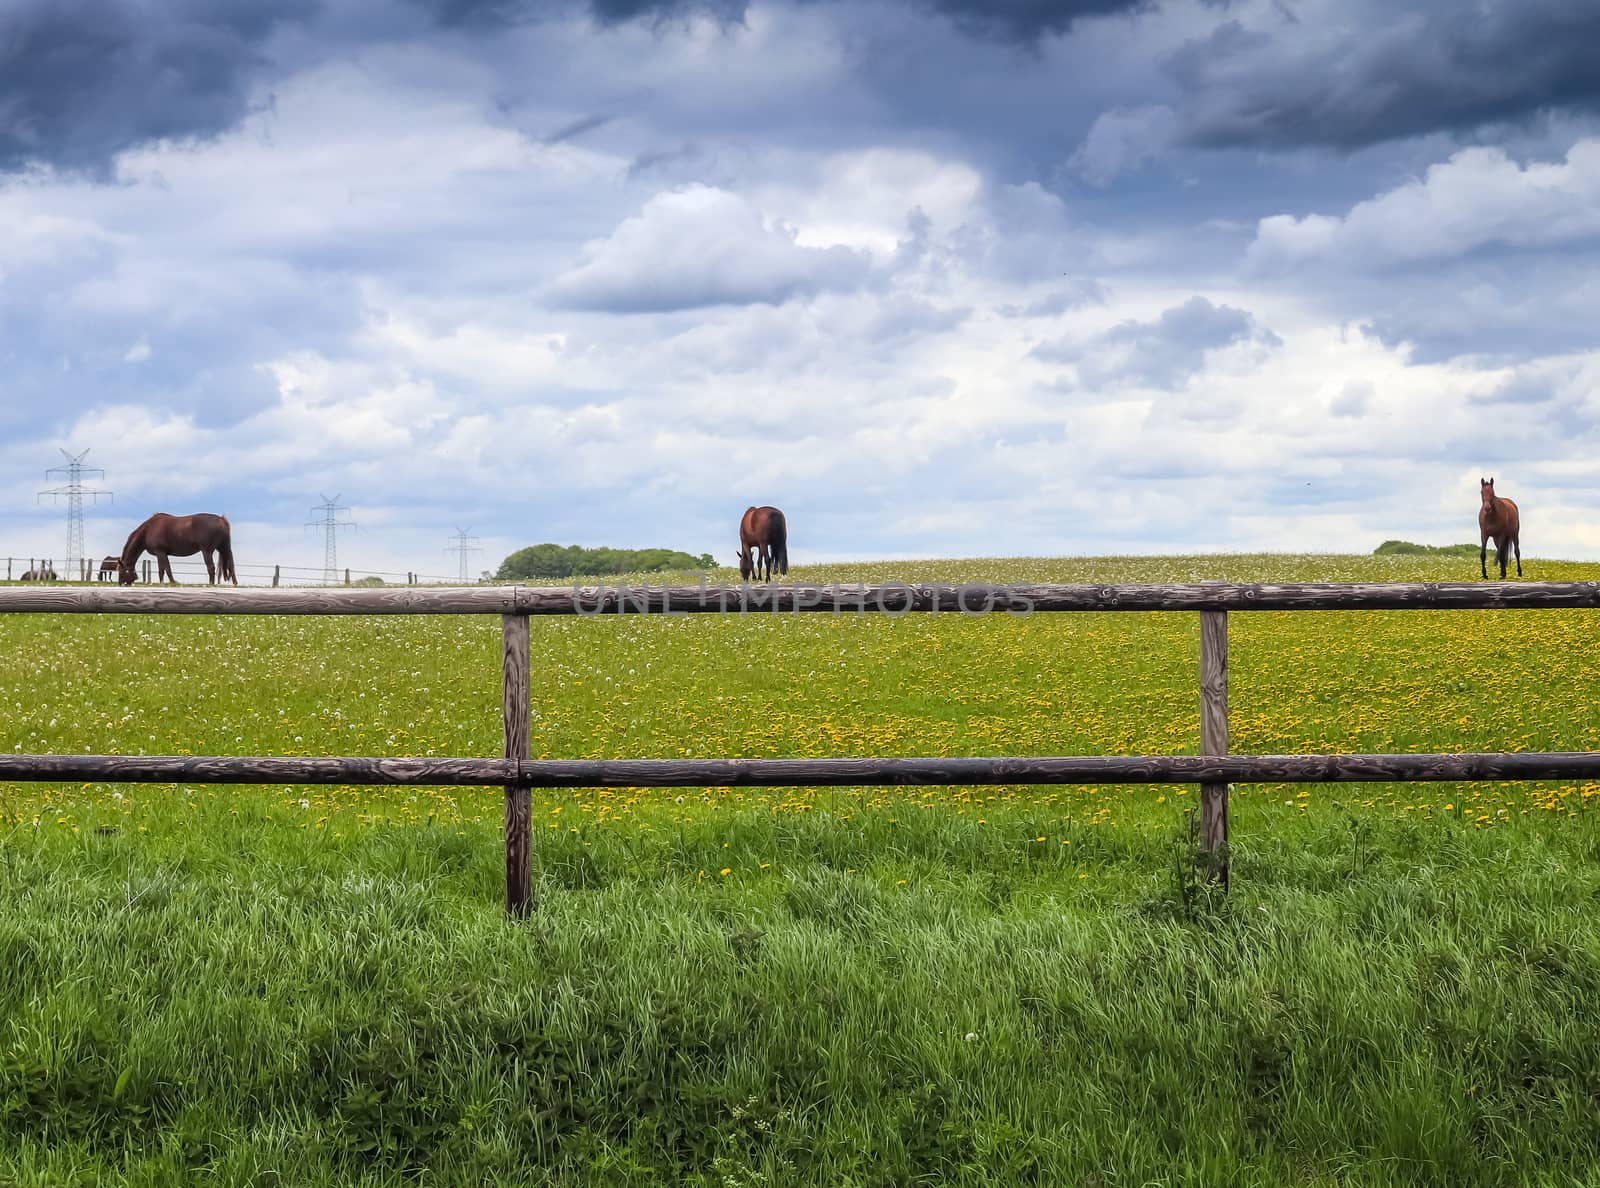 Beautiful panorama of grazing horses on a green meadow during sp by MP_foto71